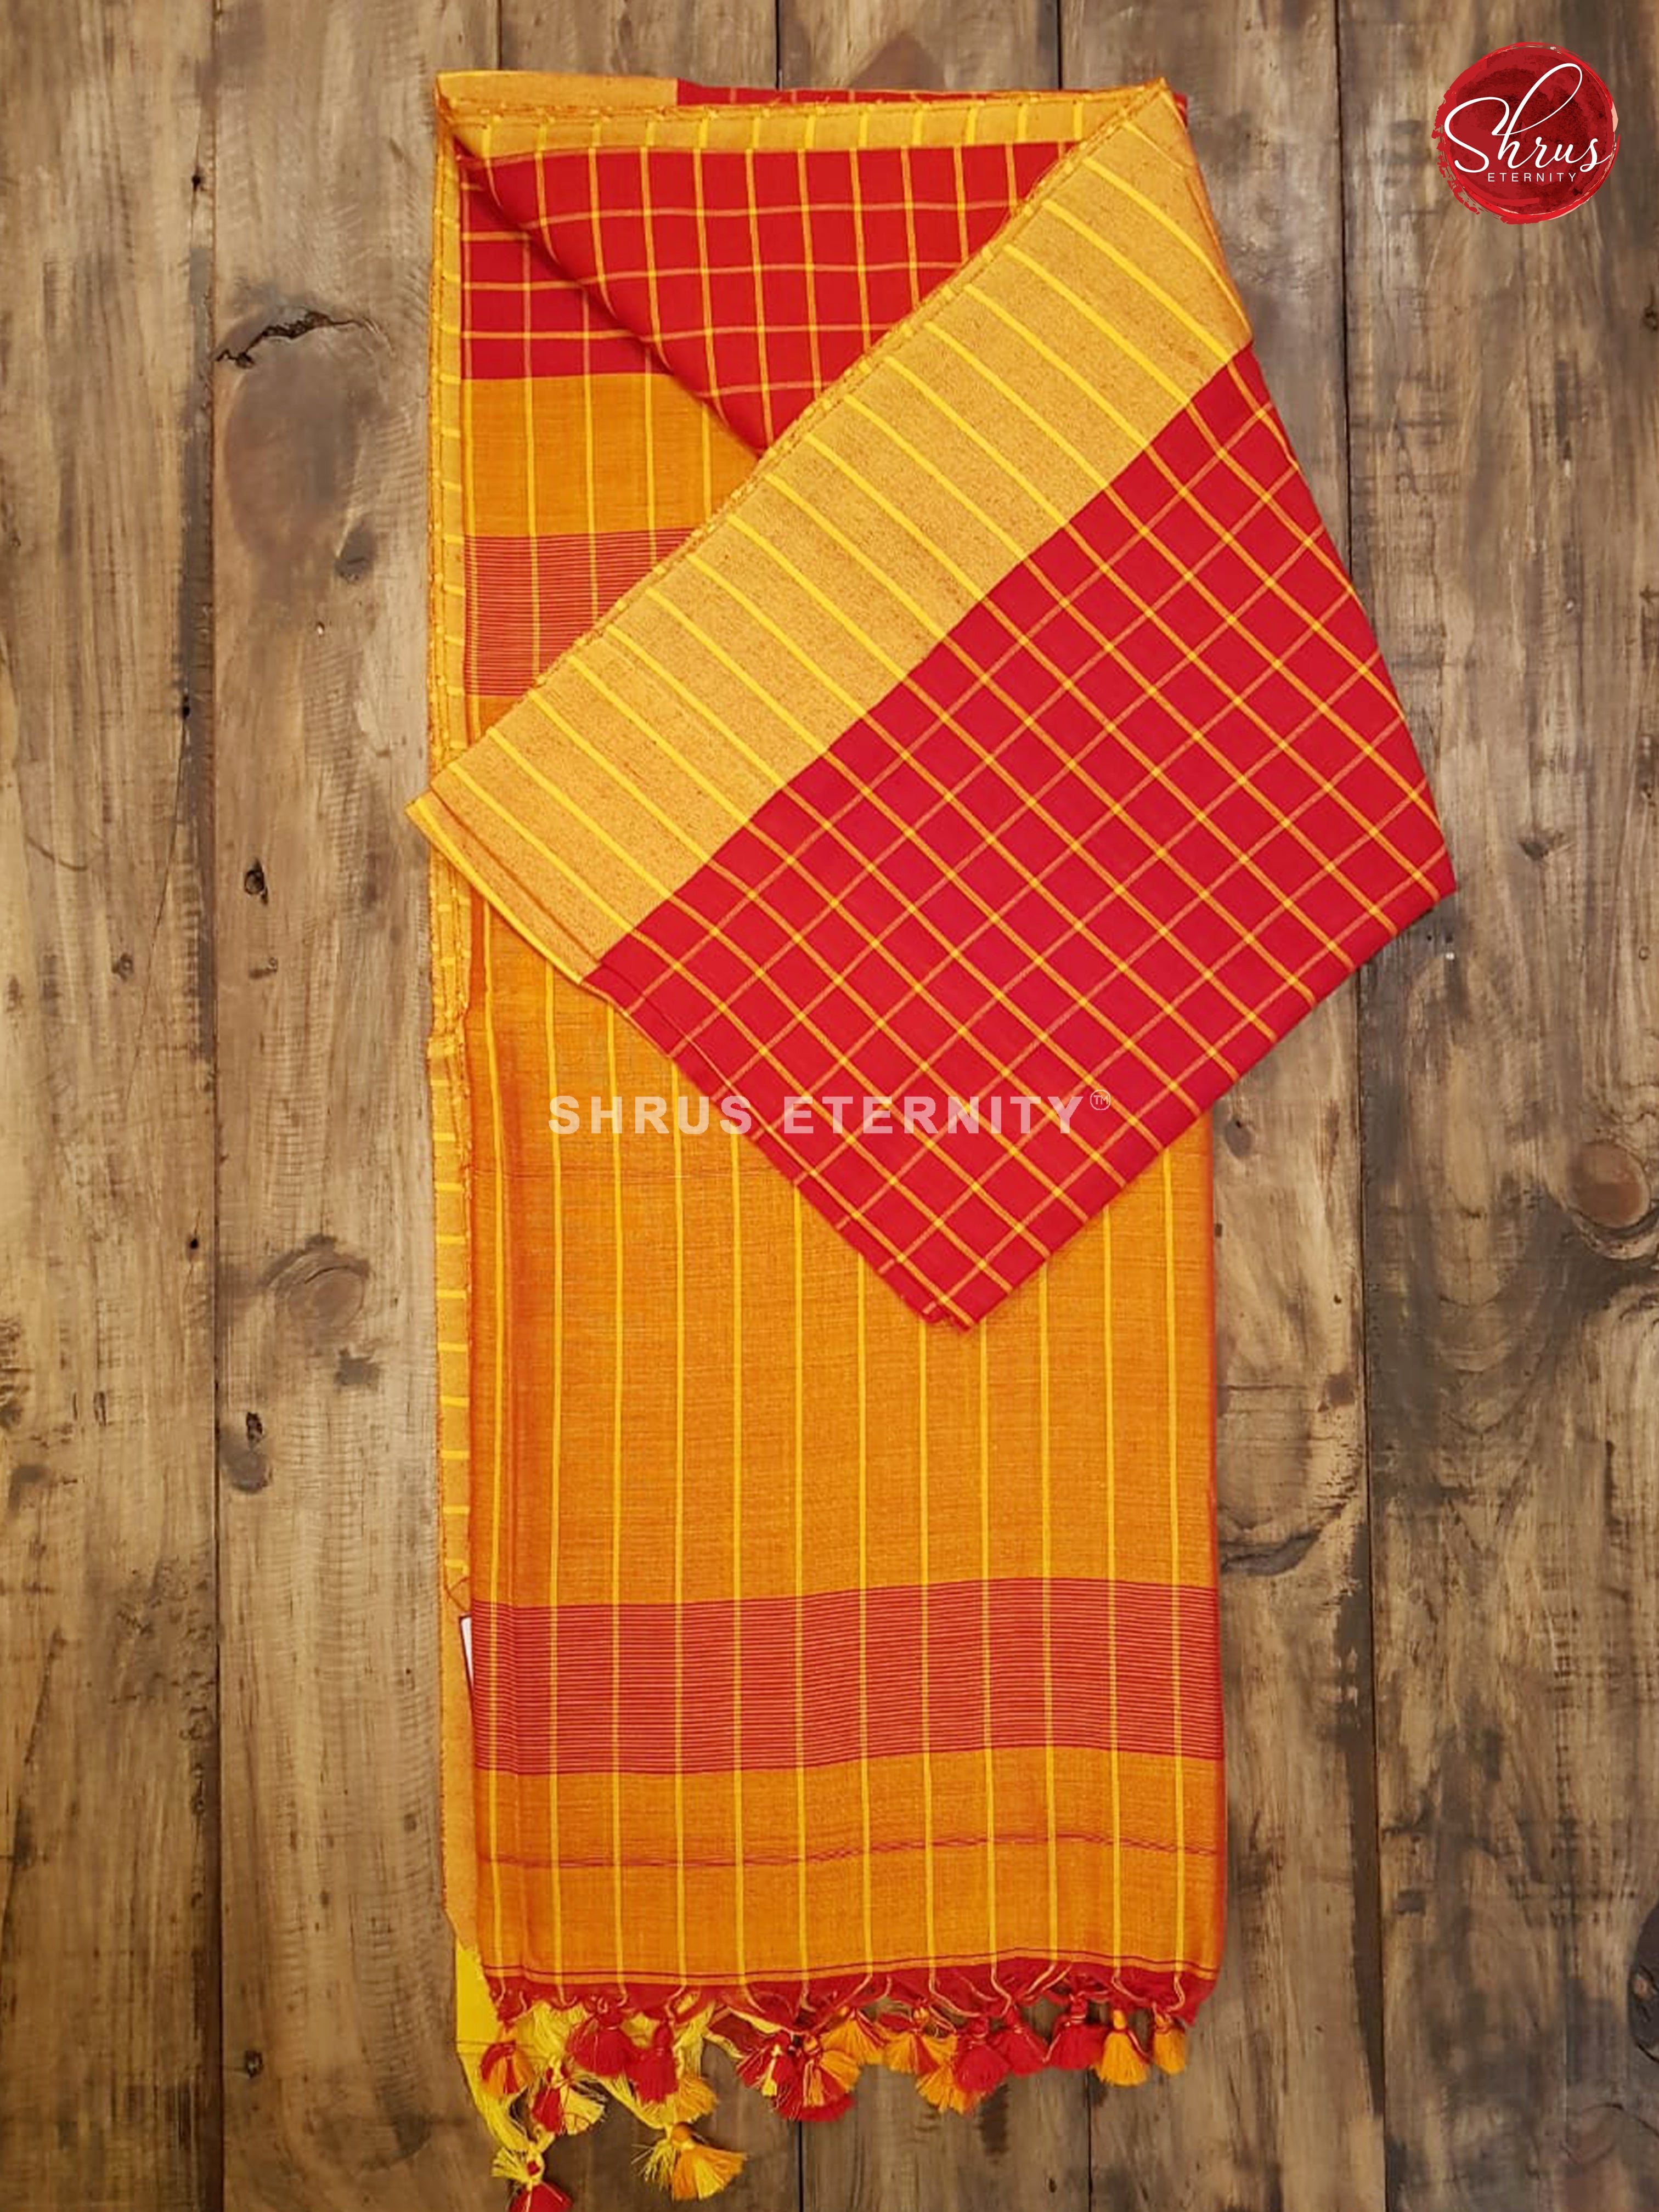 Red & Yellow - Bengal Cotton - Shop on ShrusEternity.com